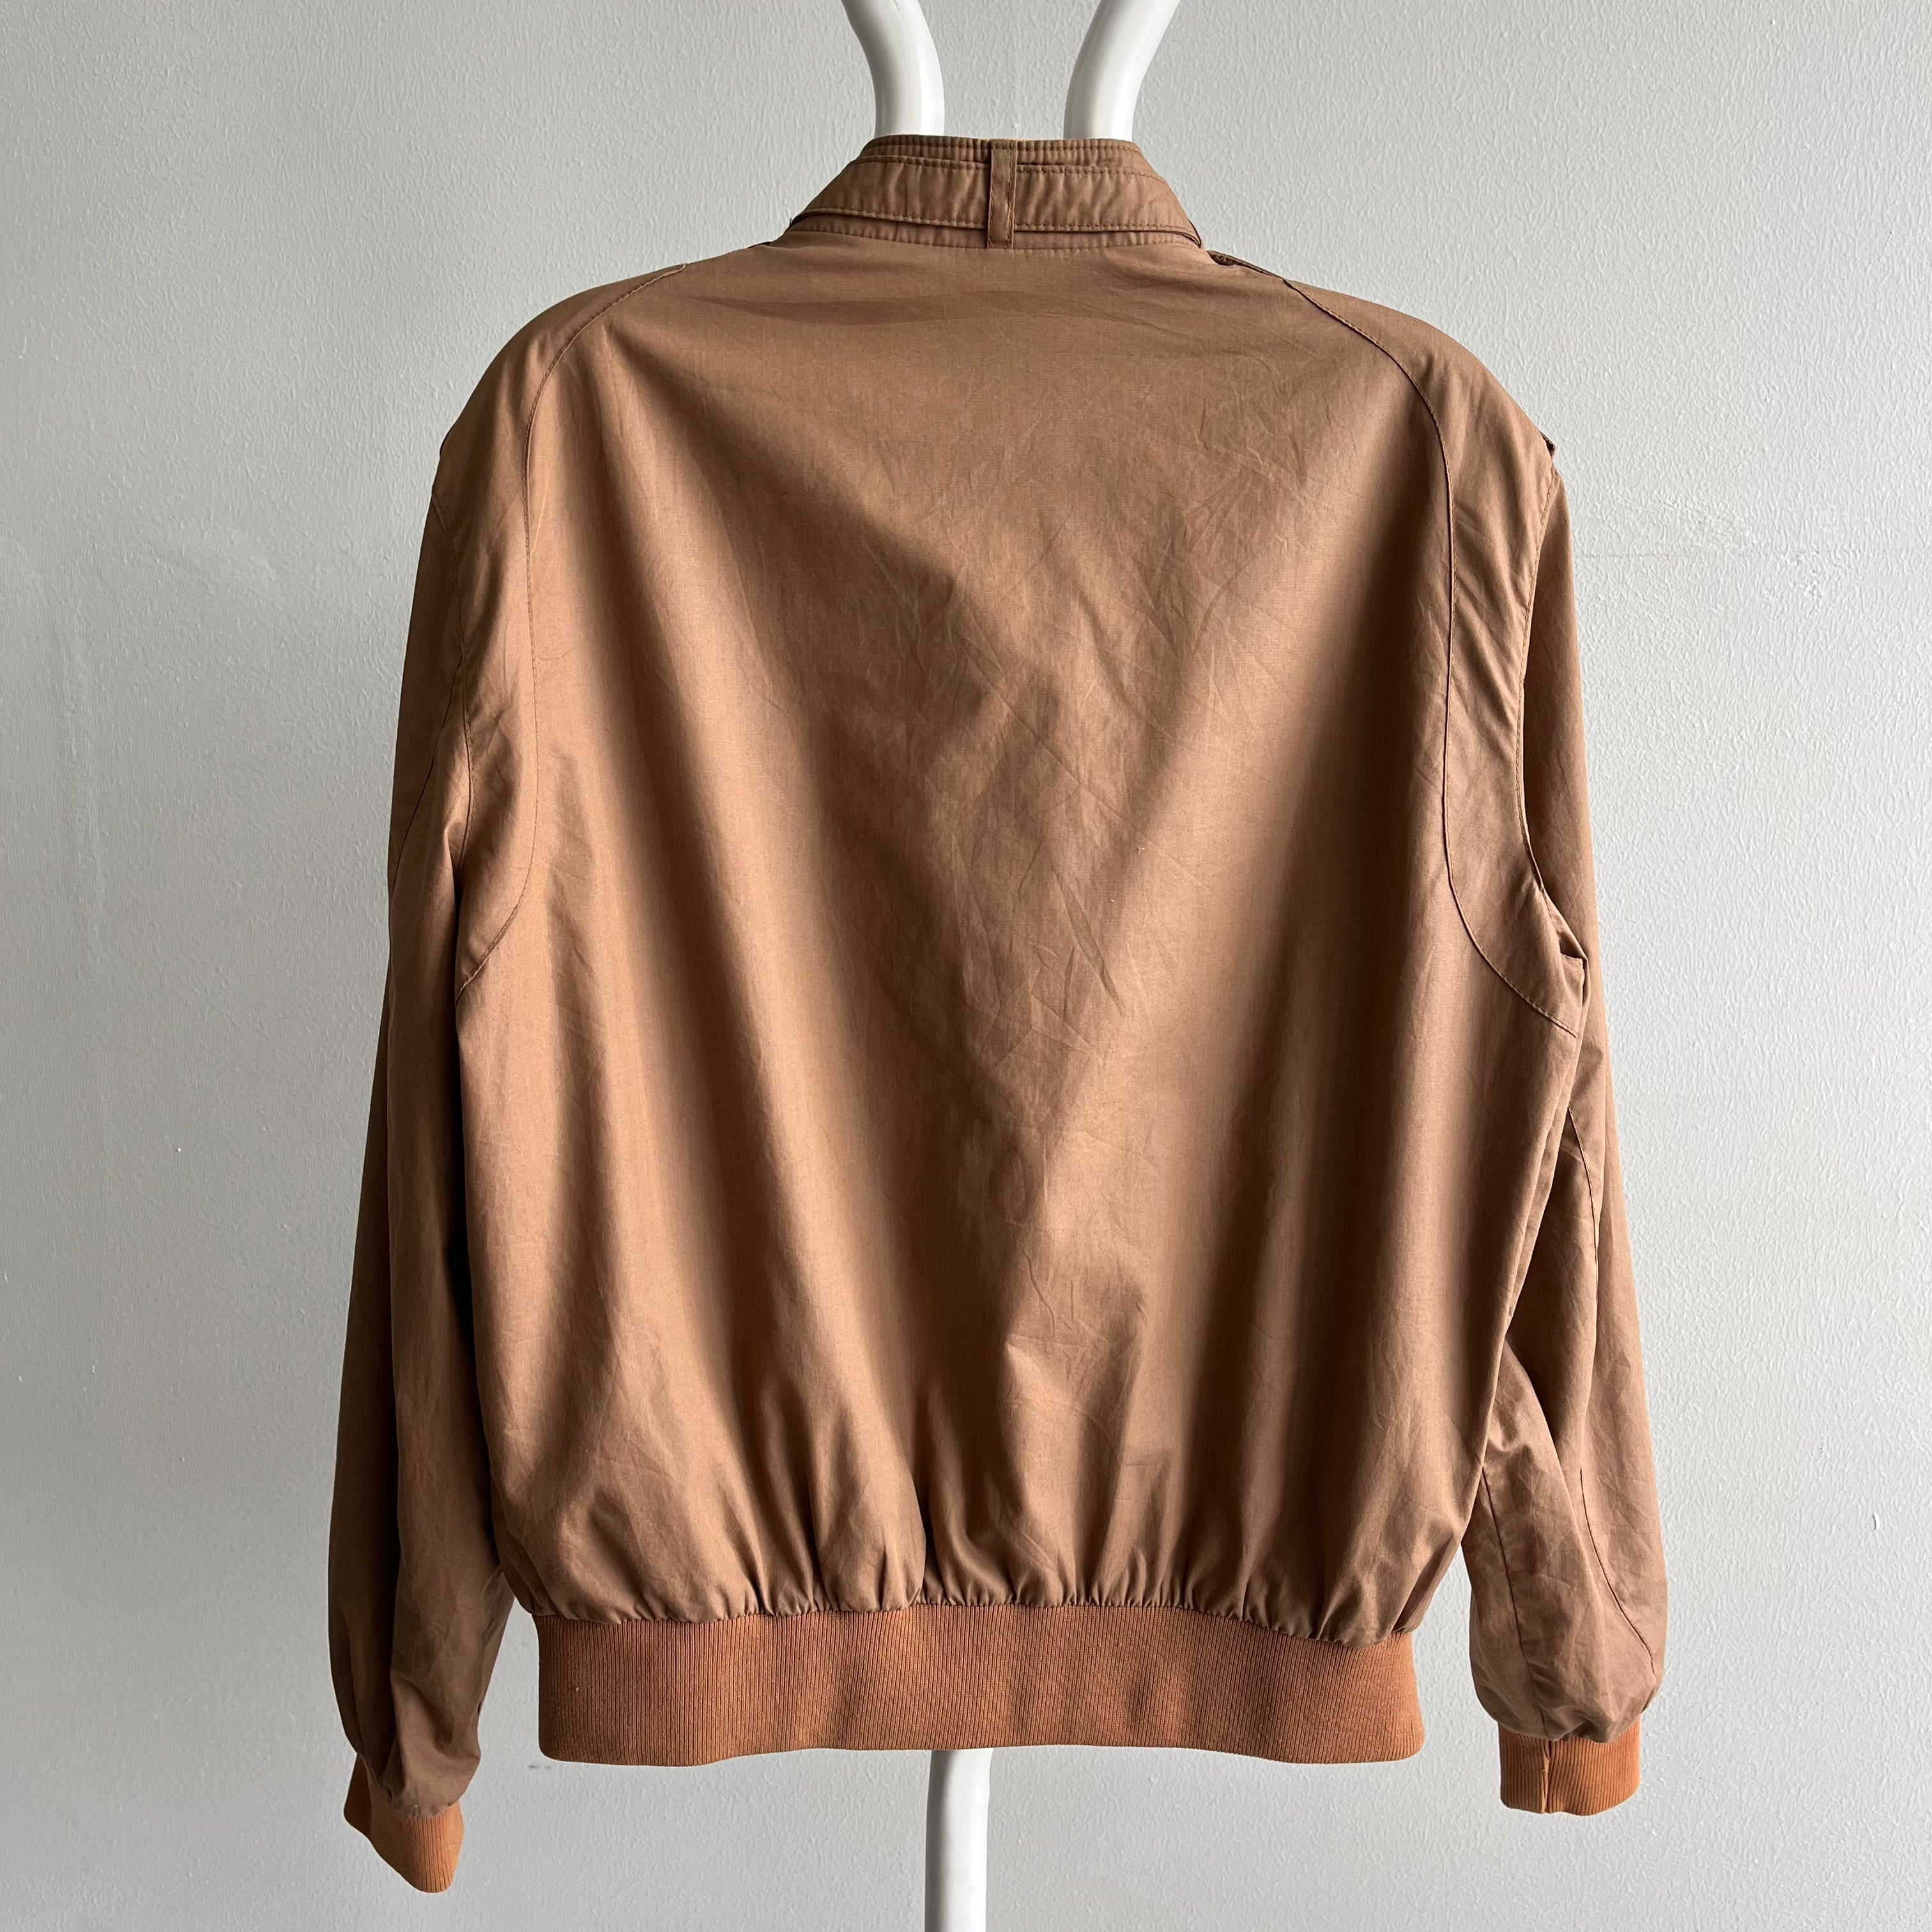 1980s Members Only Coffee Colored Jacket